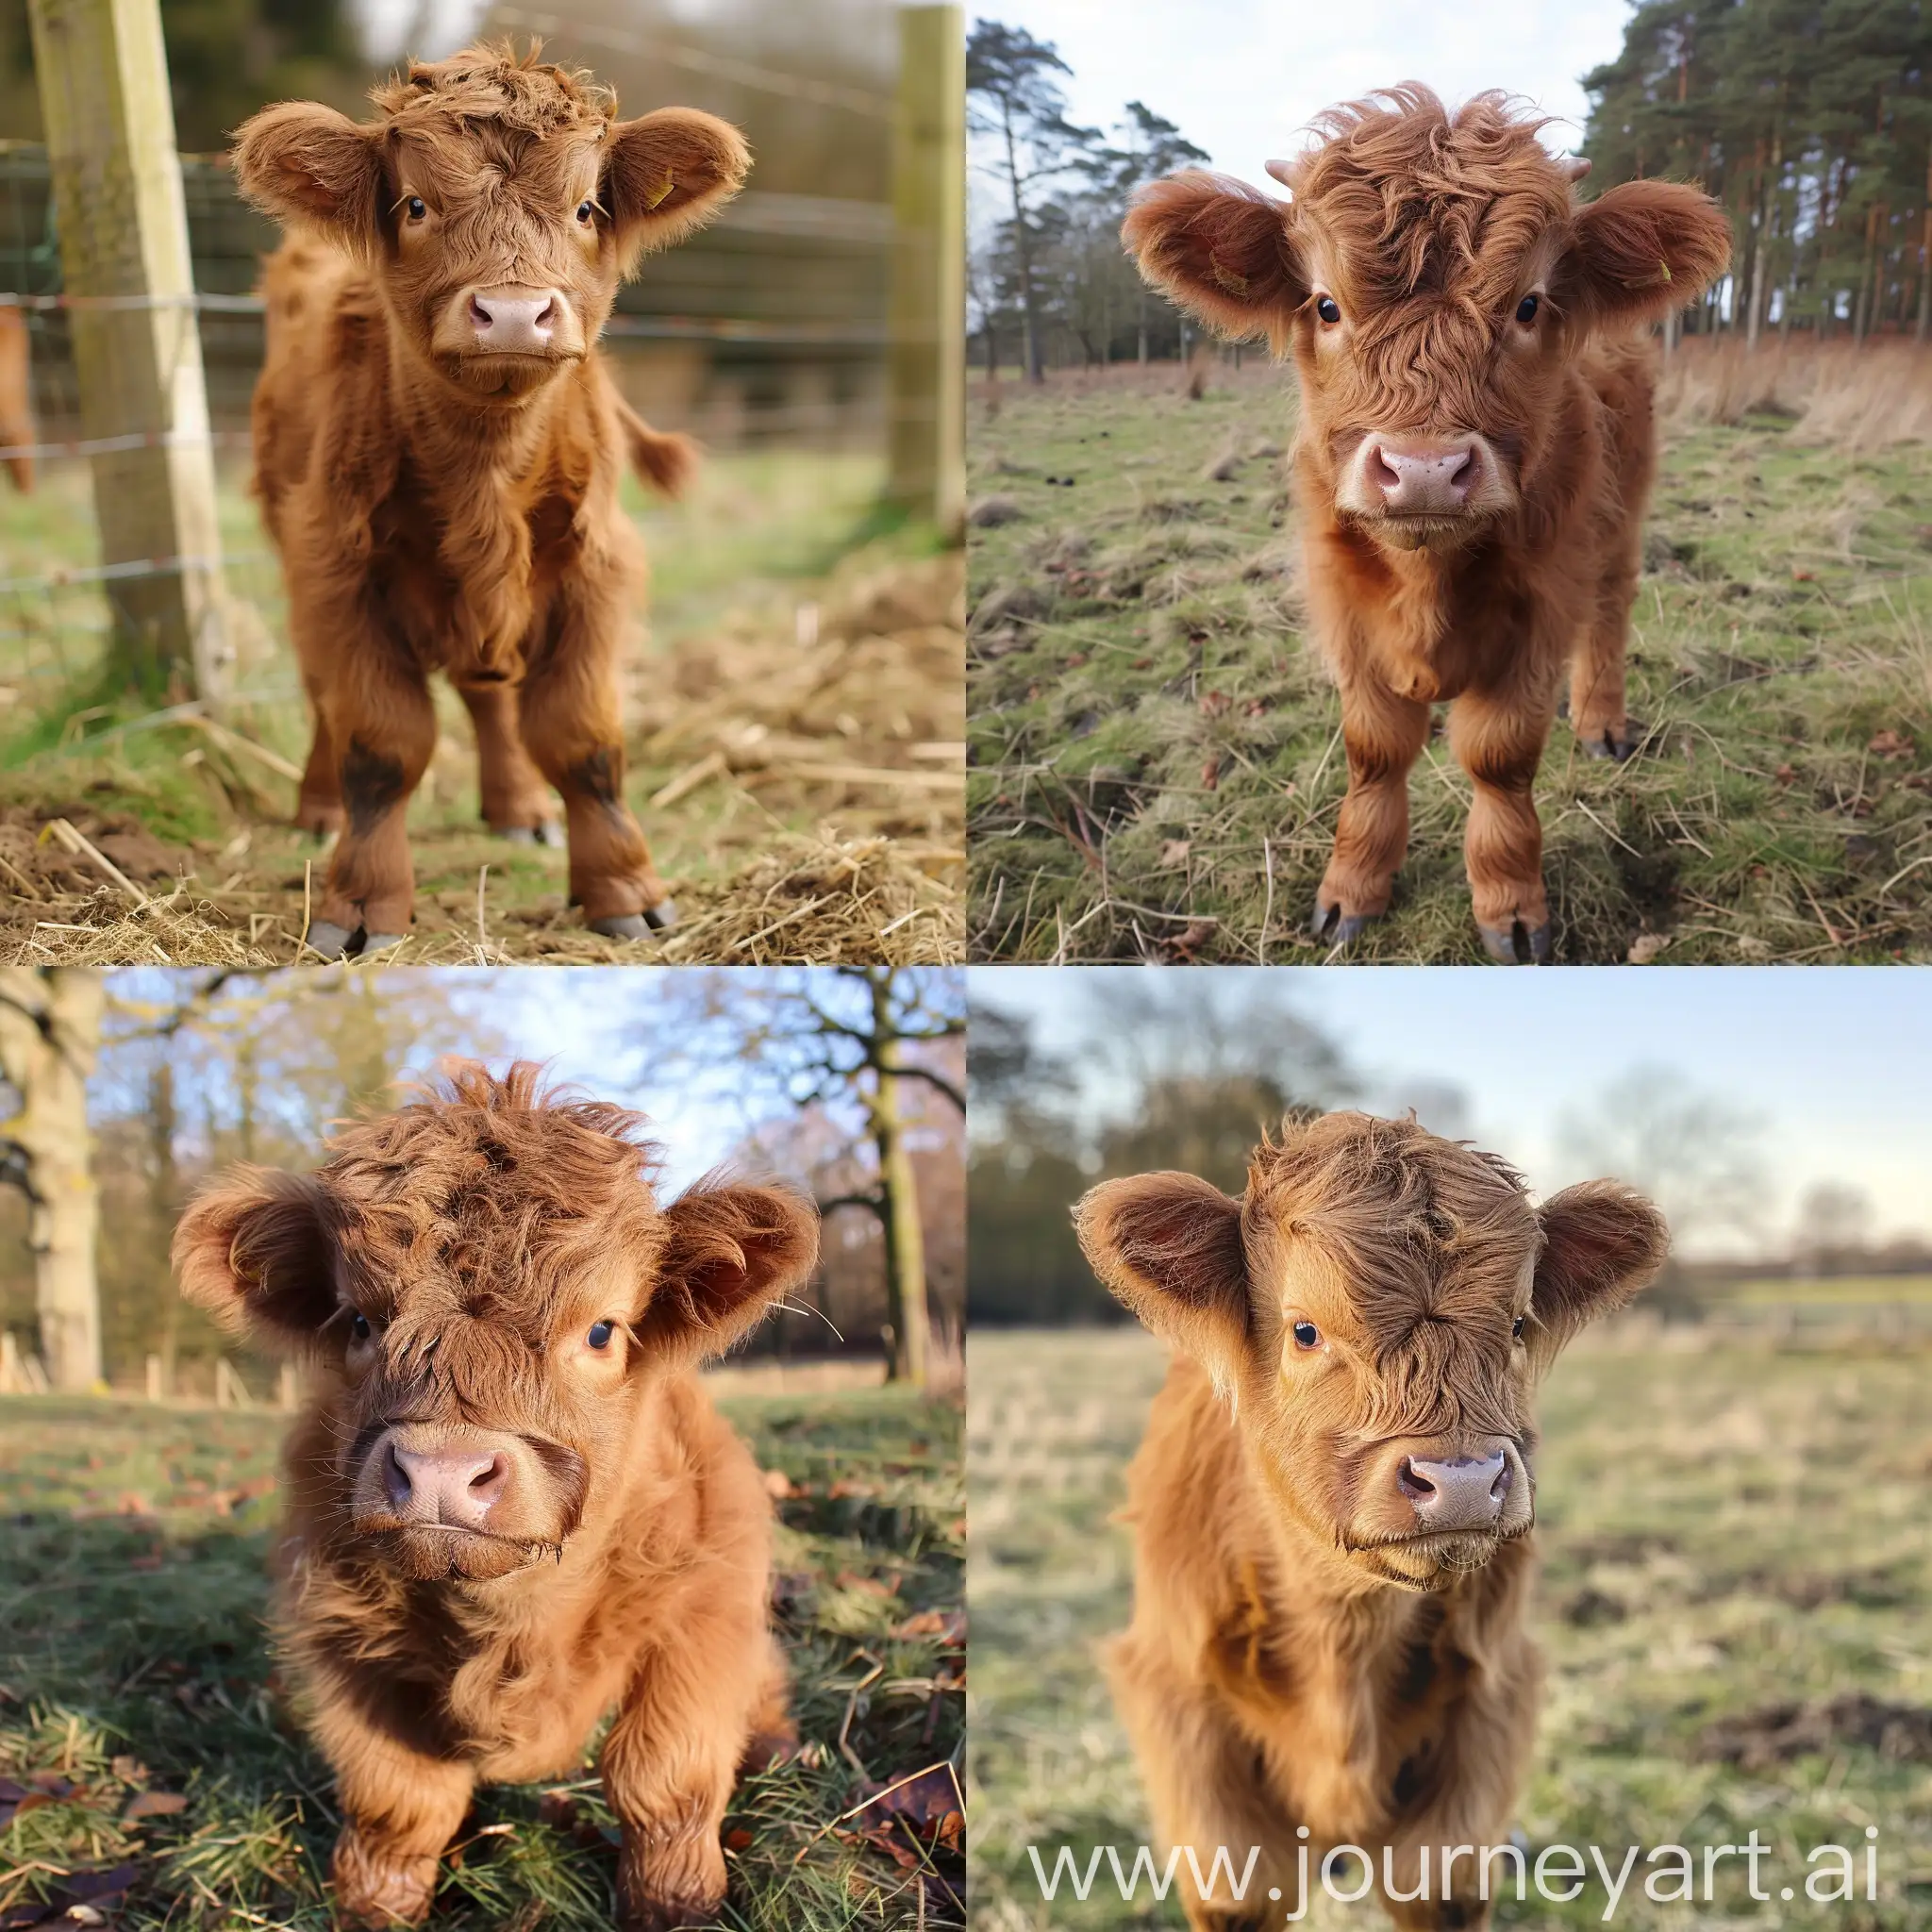 Adorable-Mini-Highland-Cow-in-Playful-Pose